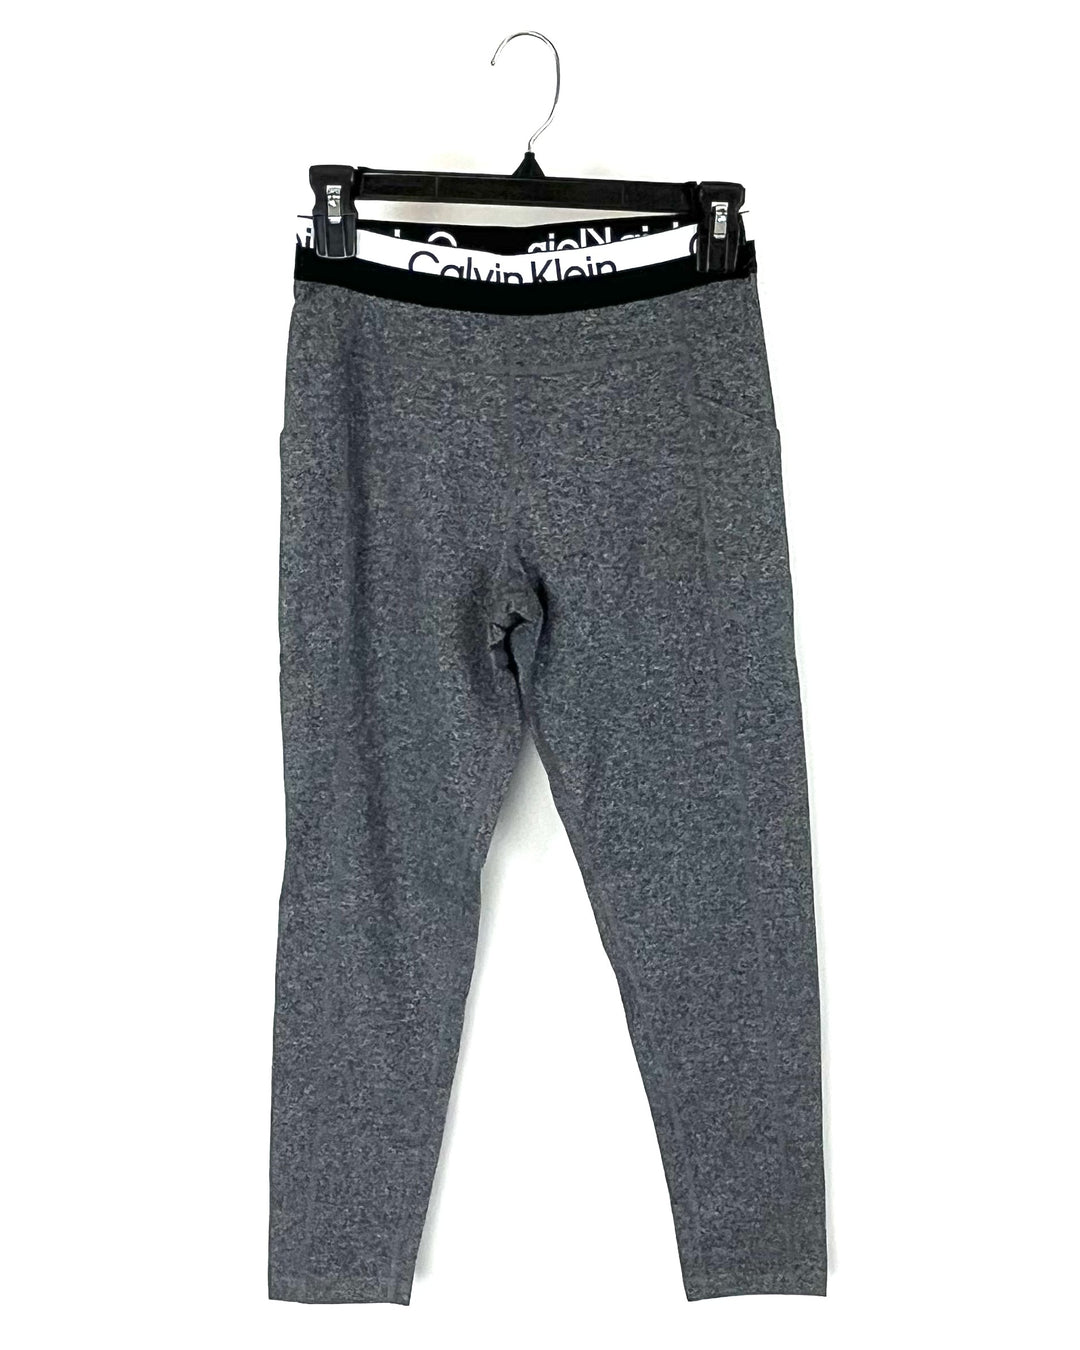 Grey Activewear Leggings with Pockets - Small